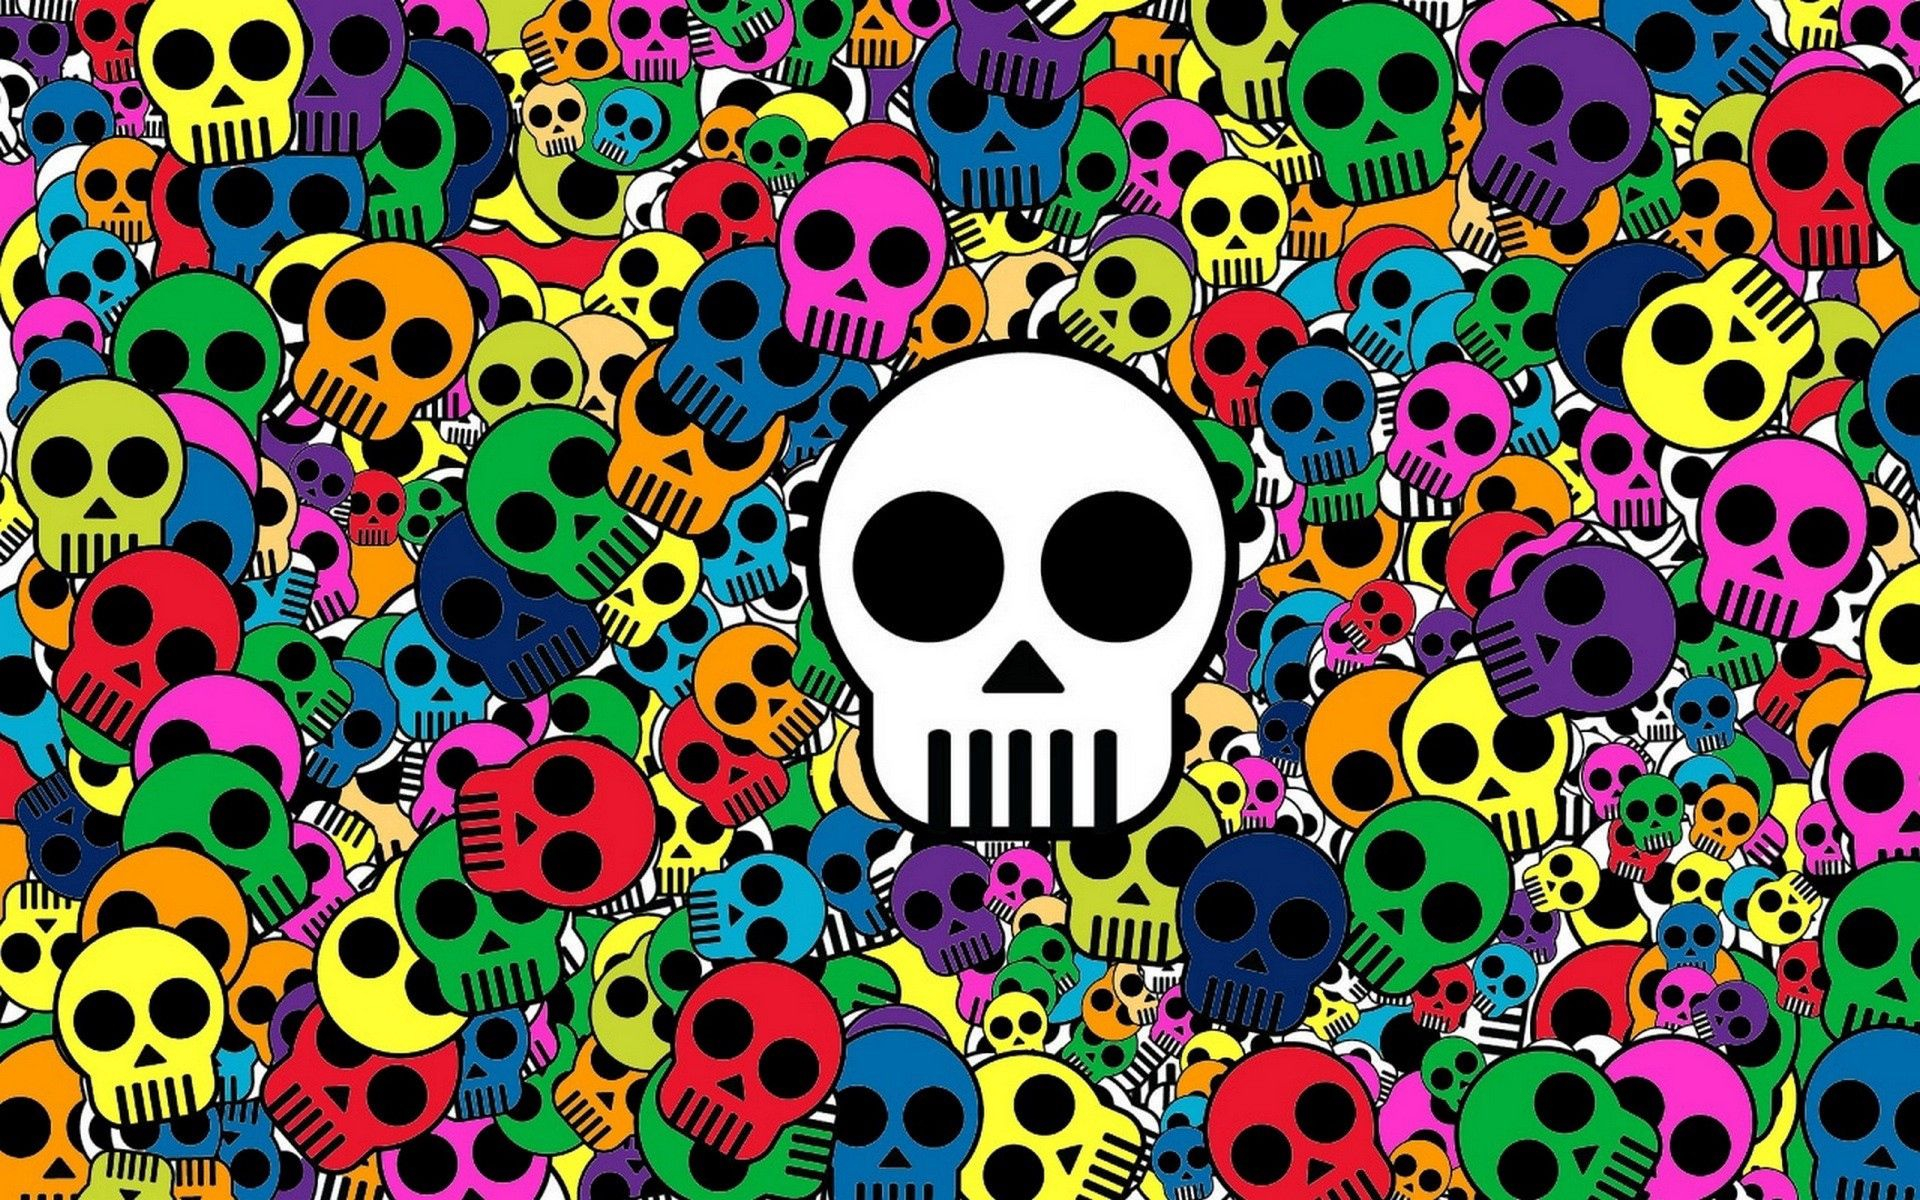 1920x1200 Mobile wallpaper: Skull, Abstract, Background, Bright, Multicolored, Motley, Skulls, 60222 download the picture for free